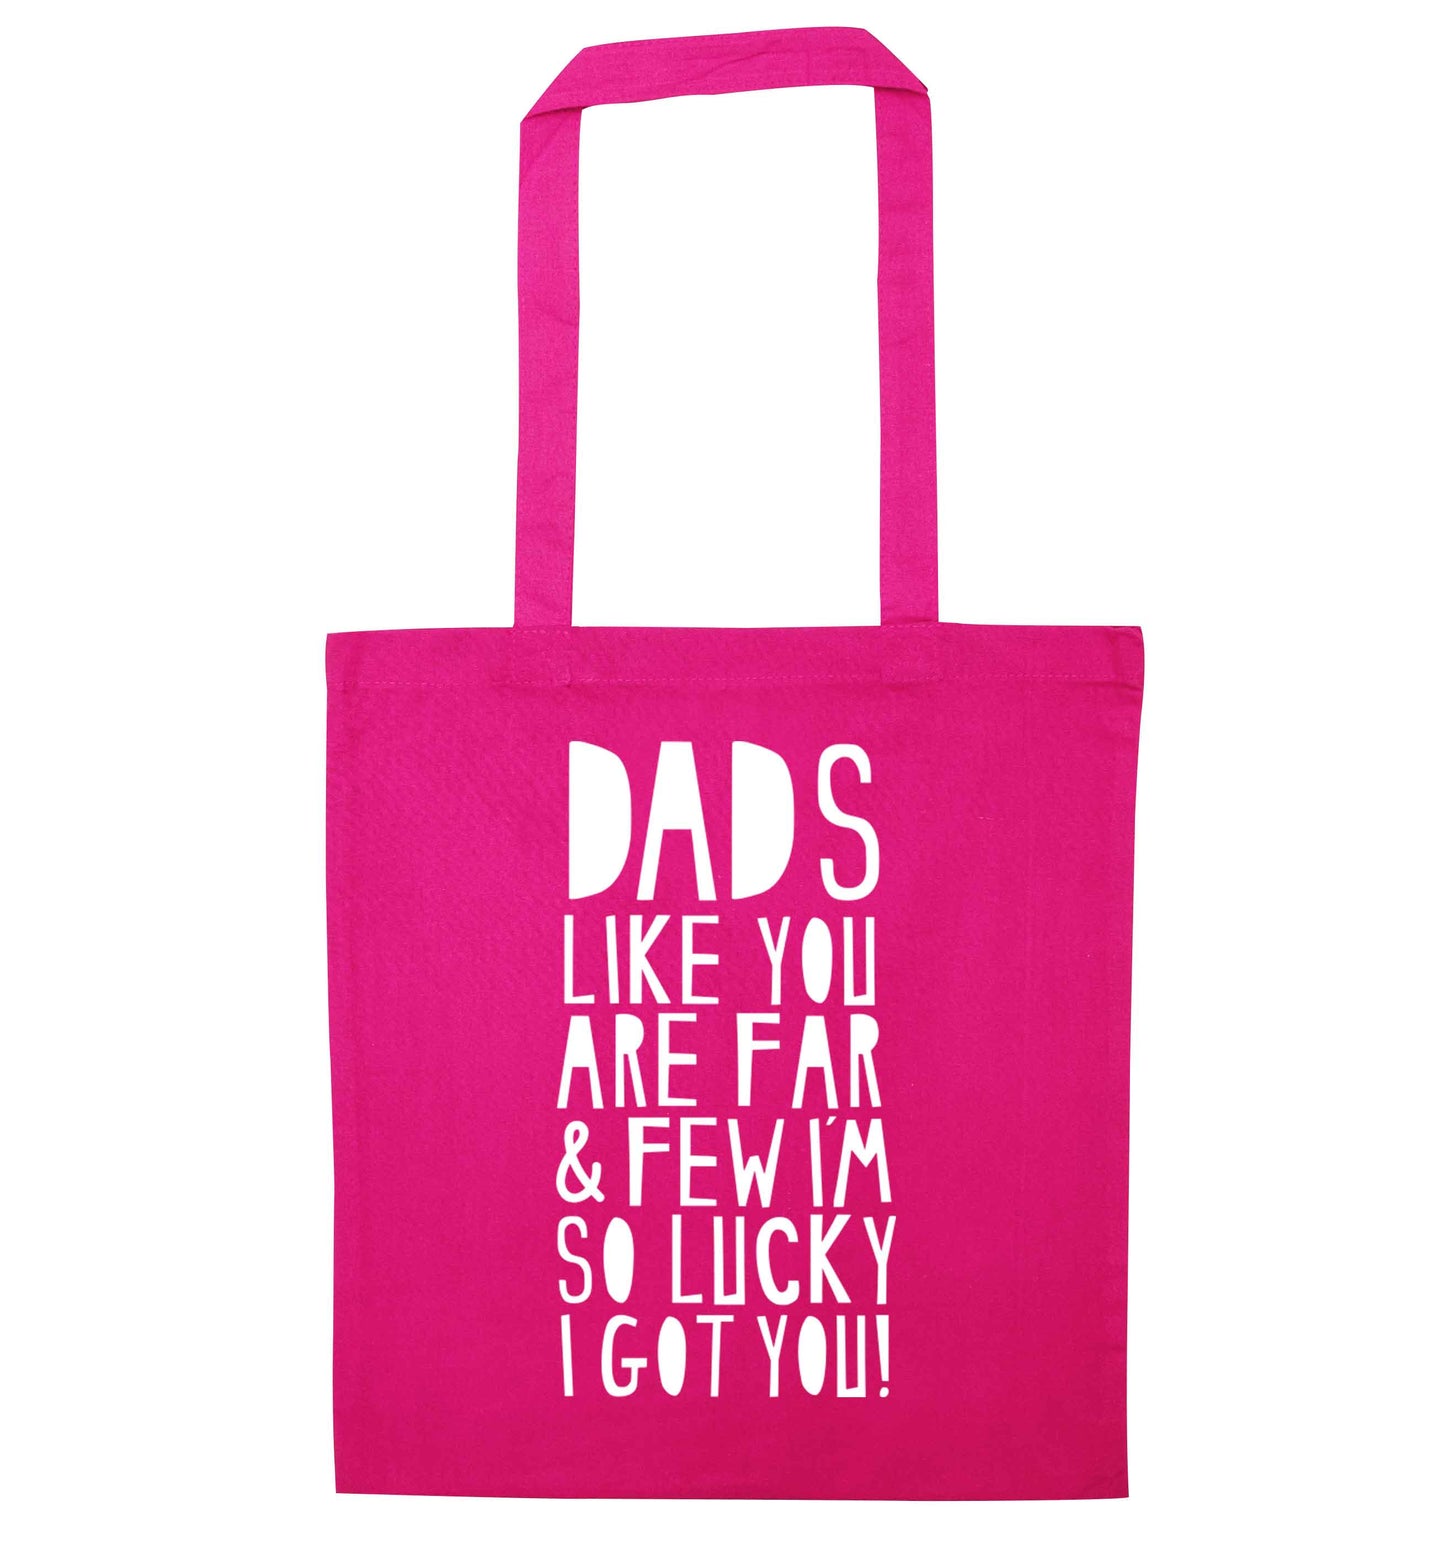 Dads like you are far and few I'm so luck I got you! pink tote bag